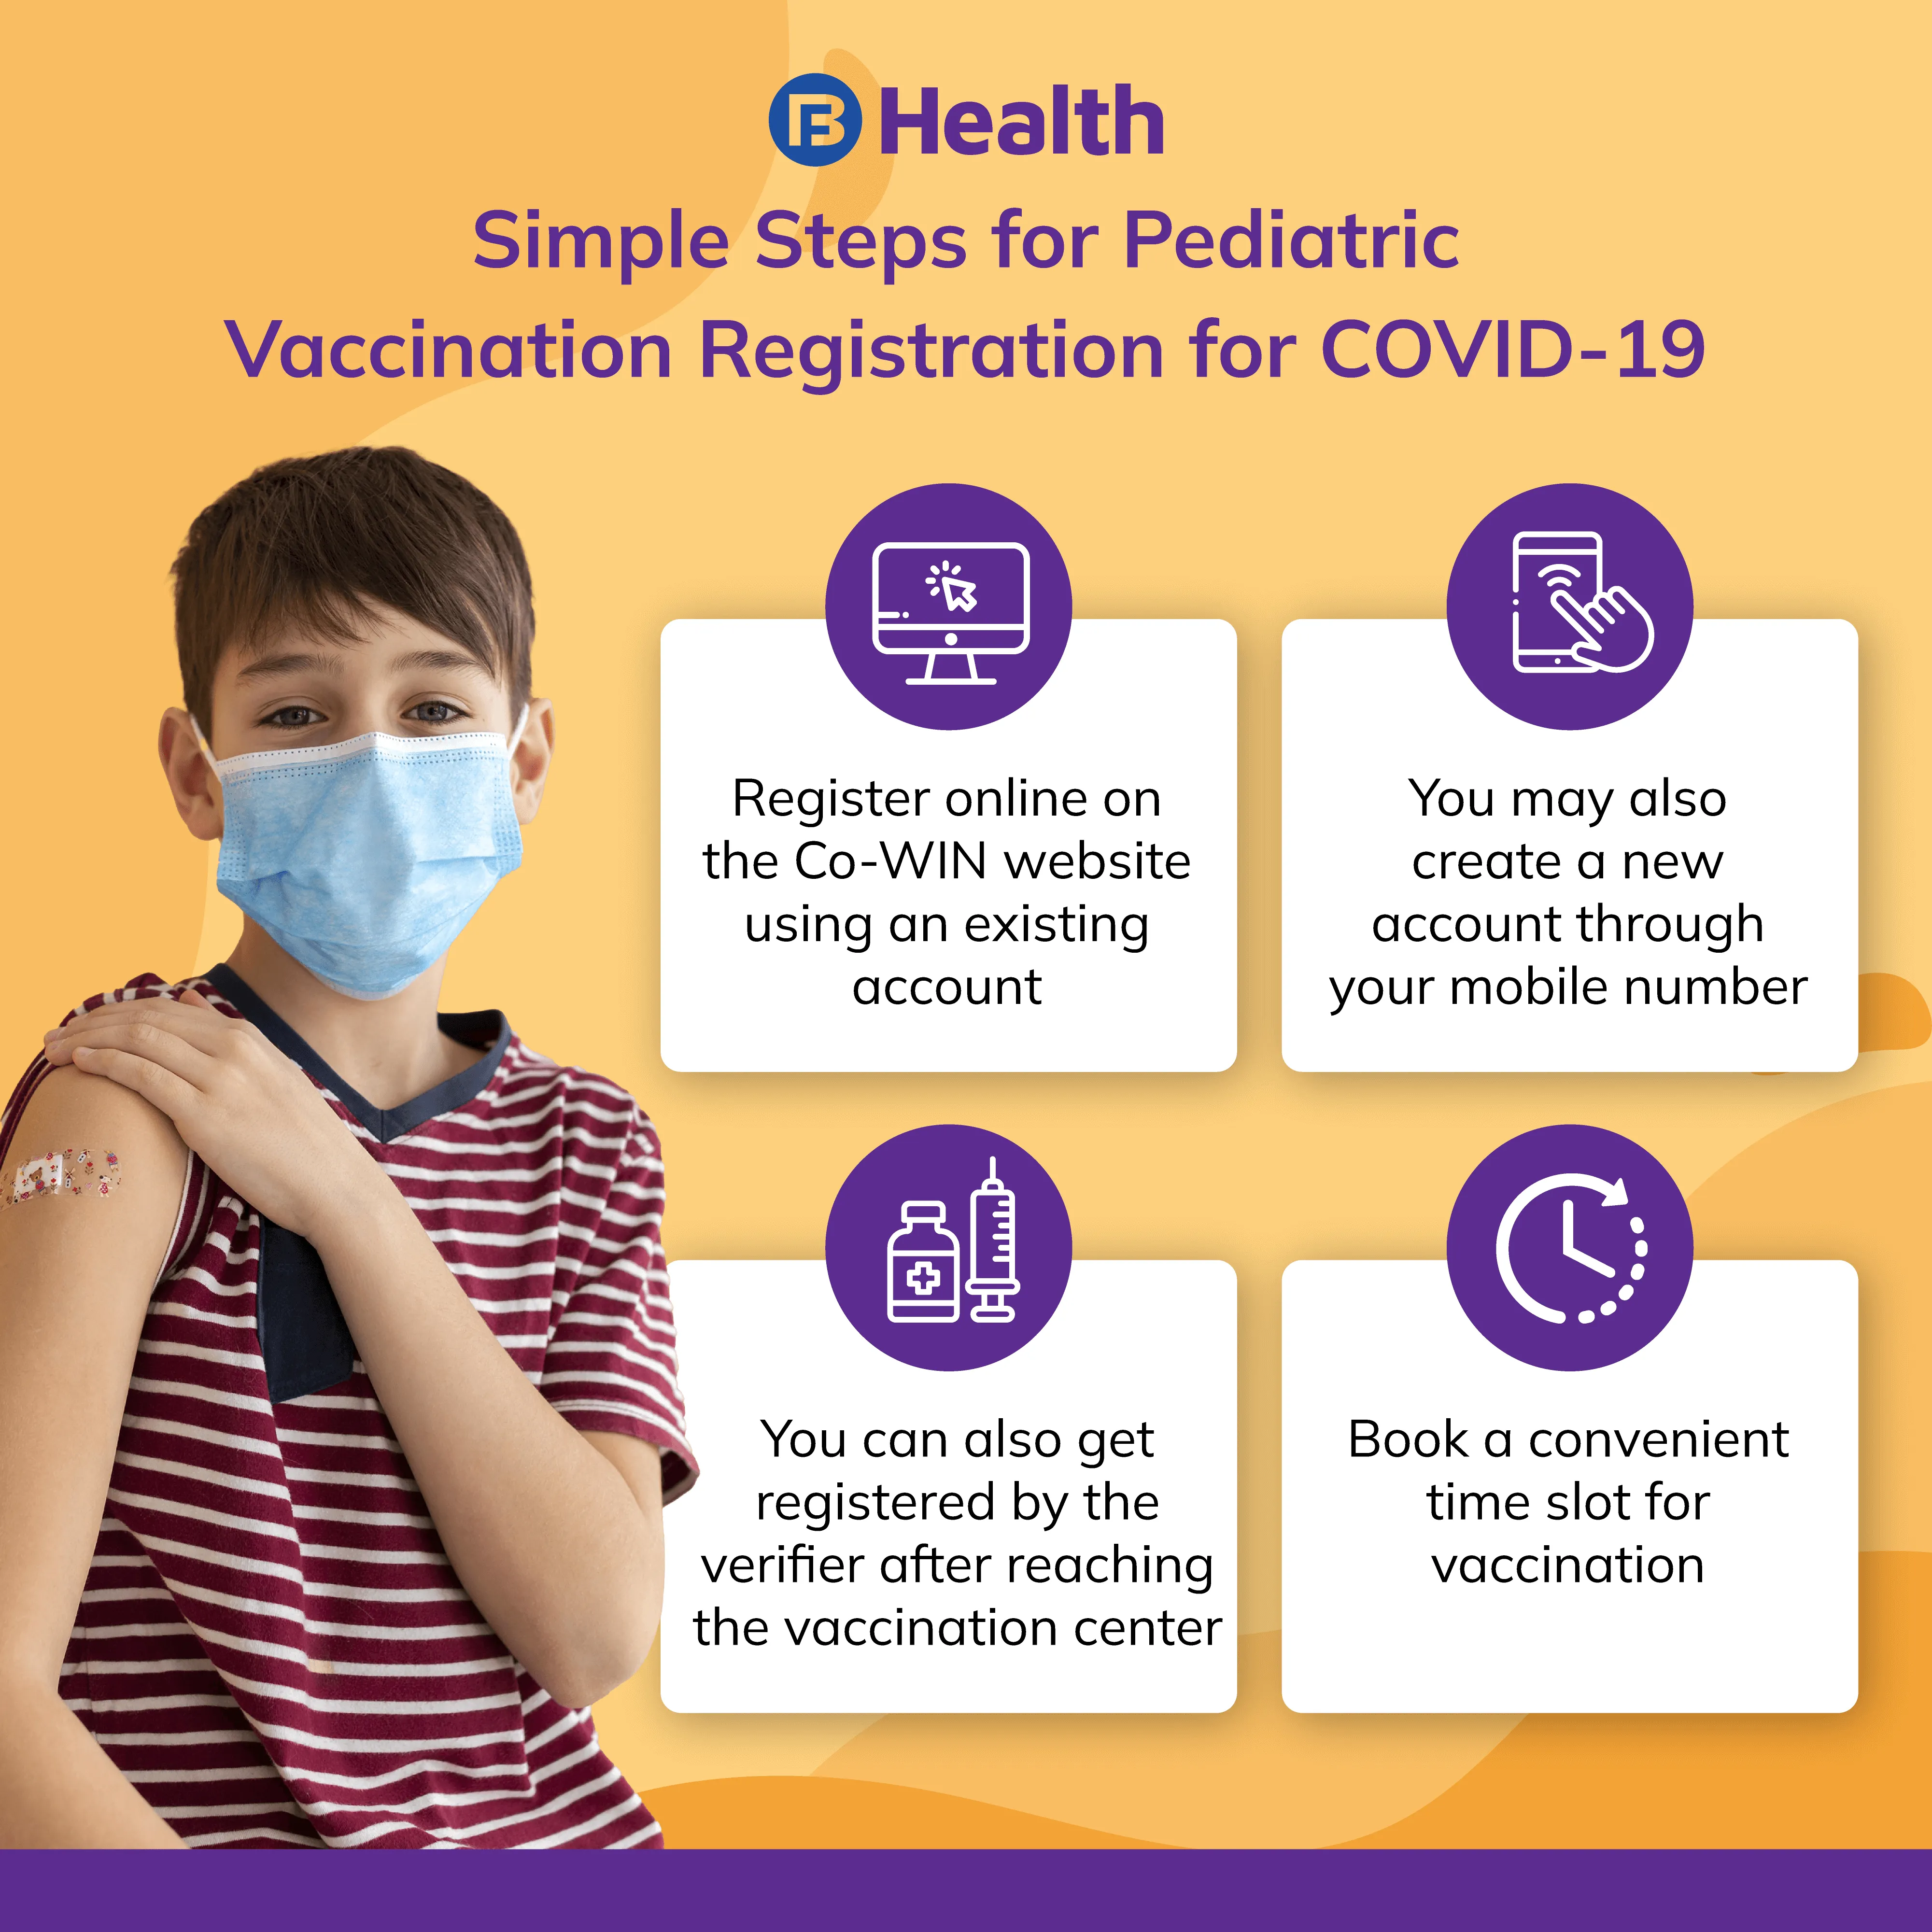 Steps for Pediatric Vaccination Registration for COVID-19